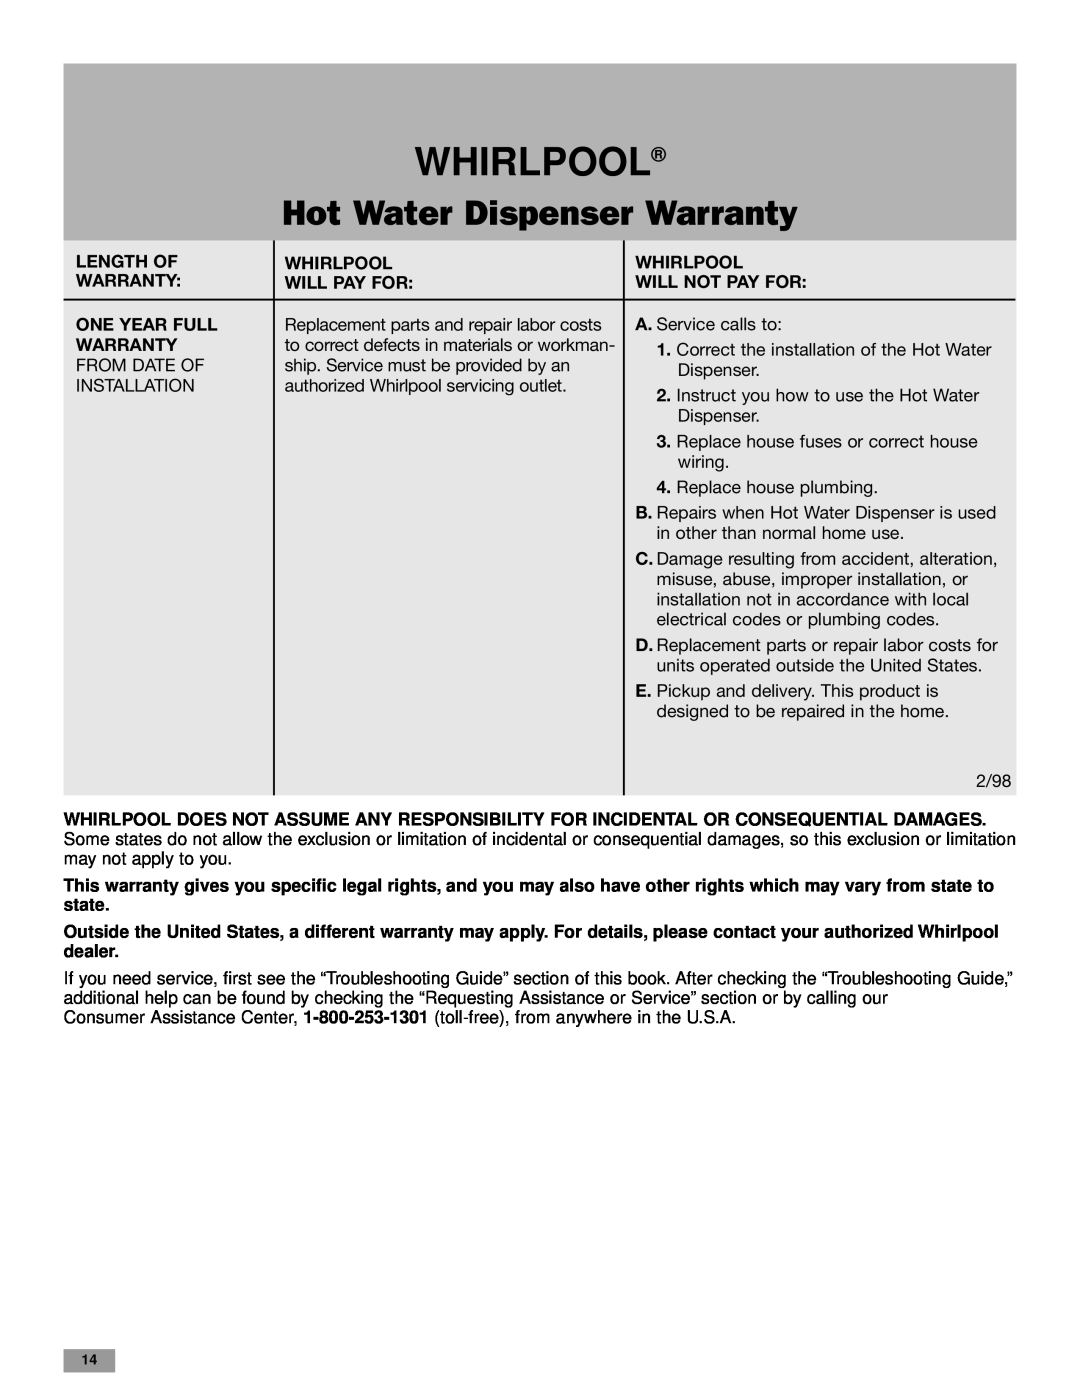 Whirlpool HD1000XSC7 Hot Water Dispenser Warranty, Length Of, Whirlpool, Will Pay For, Will Not Pay For, One Year Full 